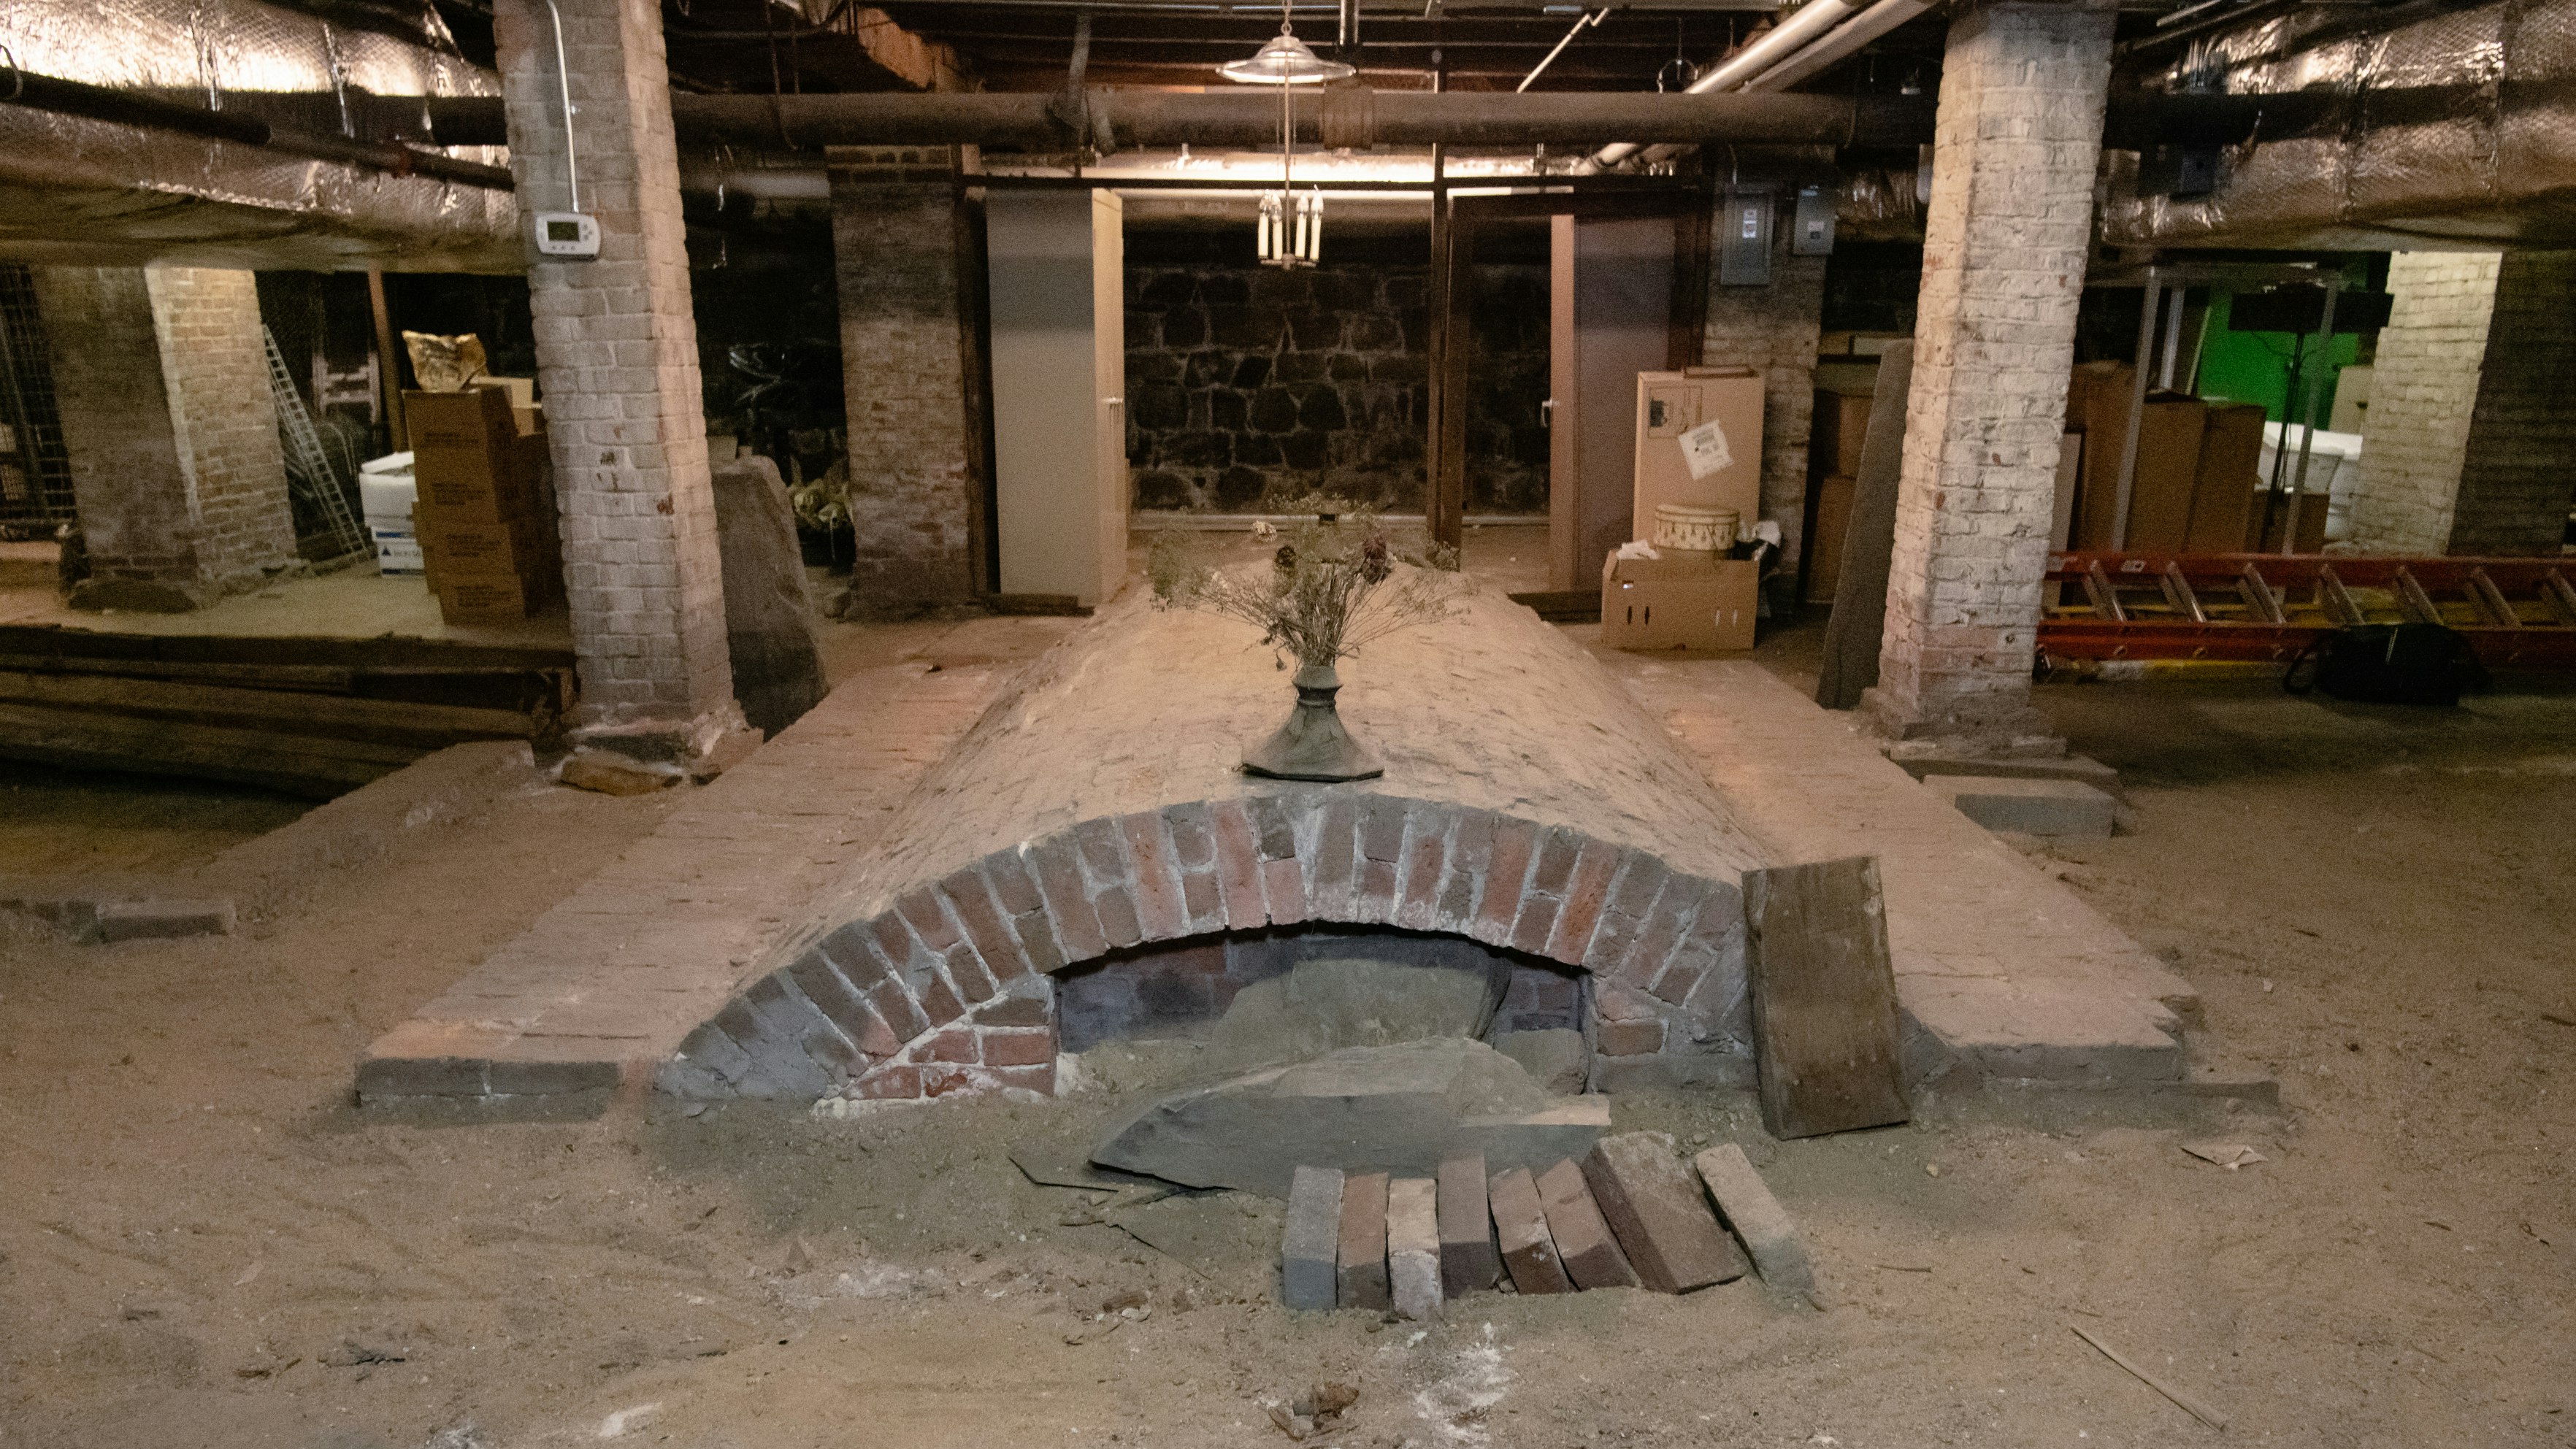 An unfinished, dirt-floored basement with cardboard boxes and several ladders scattered about. At the center, a curved brick structure that contains a tomb.